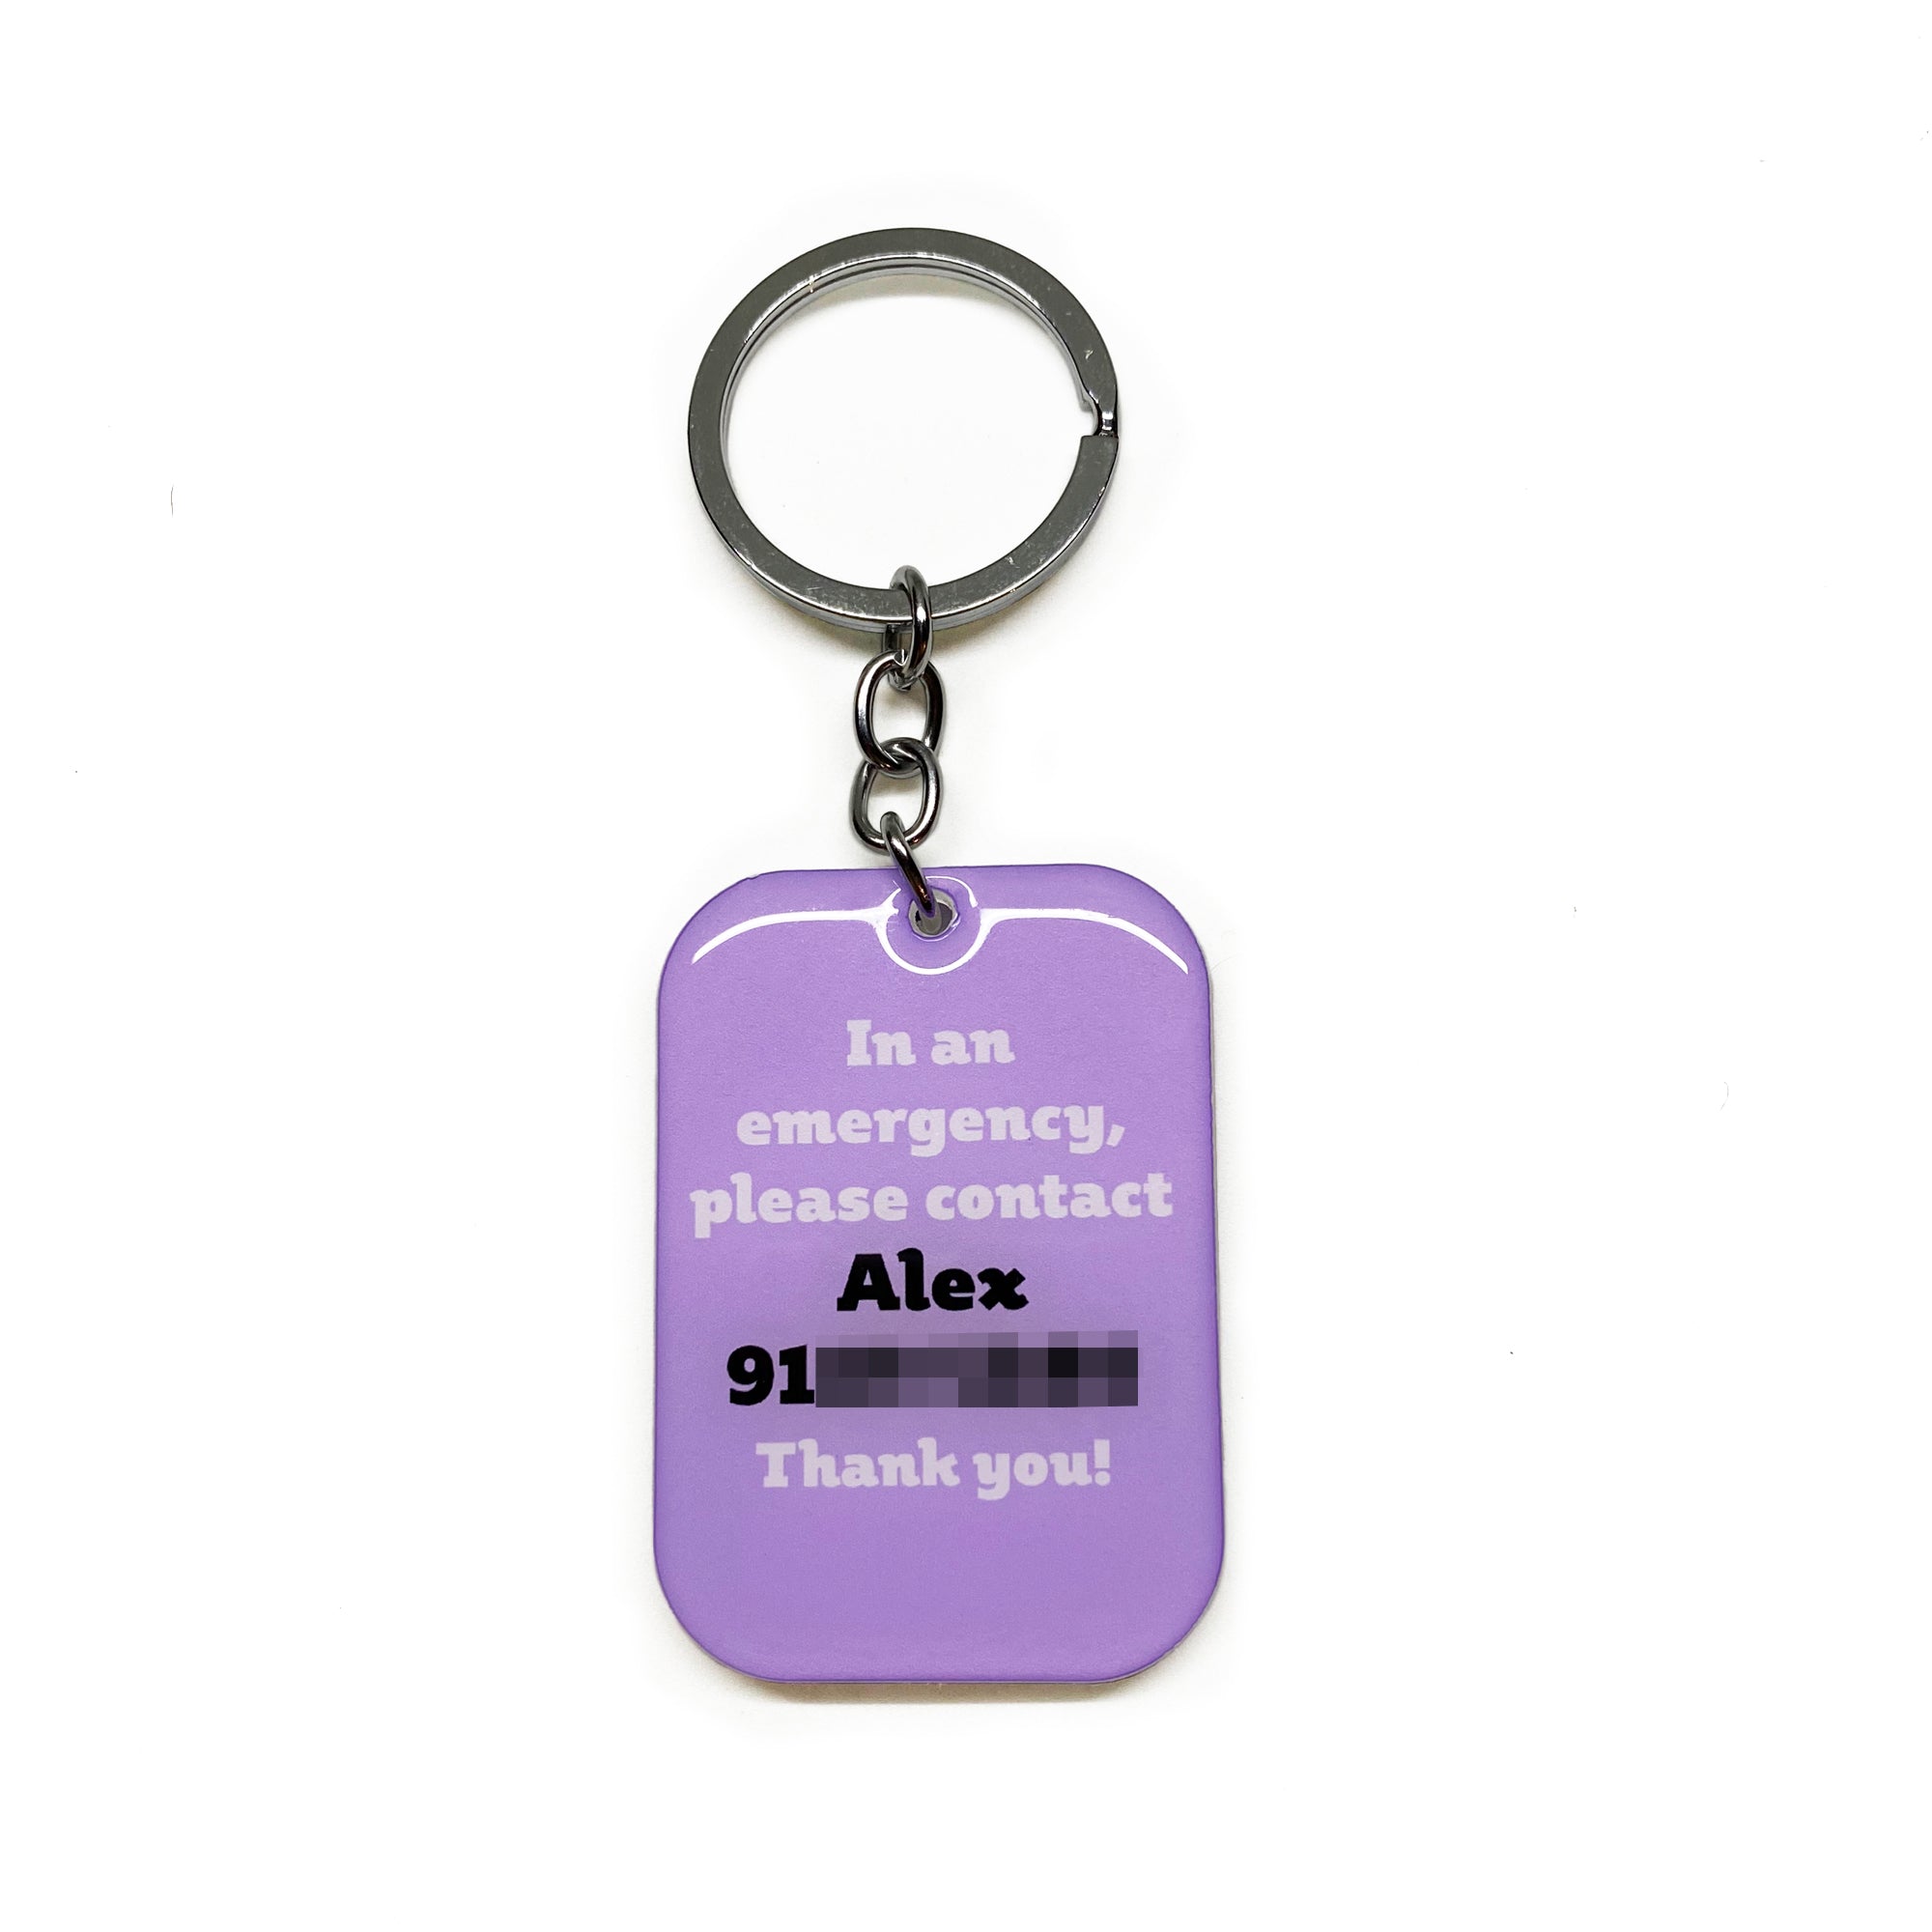 My Pet Is Home Alone Keychain Rectangular - 2x Tags Dog Name Tags by Bashtags